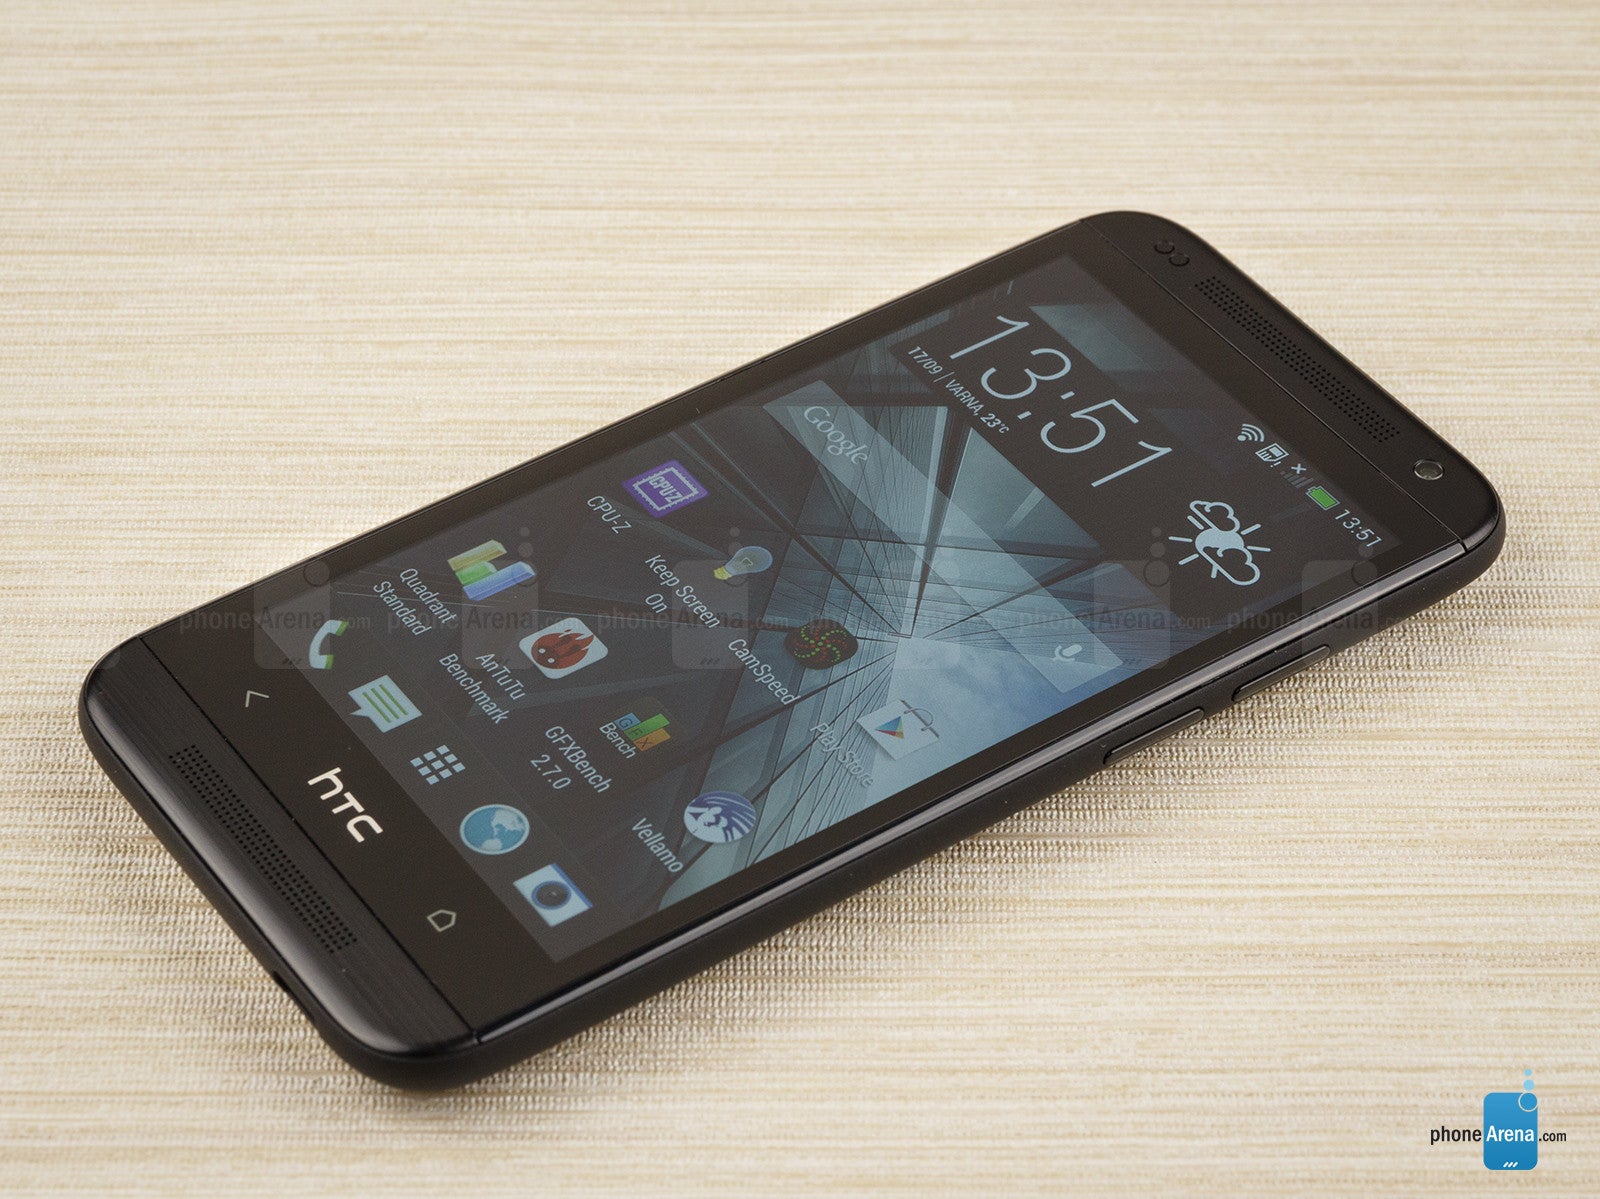 HTC Desire 601 Review